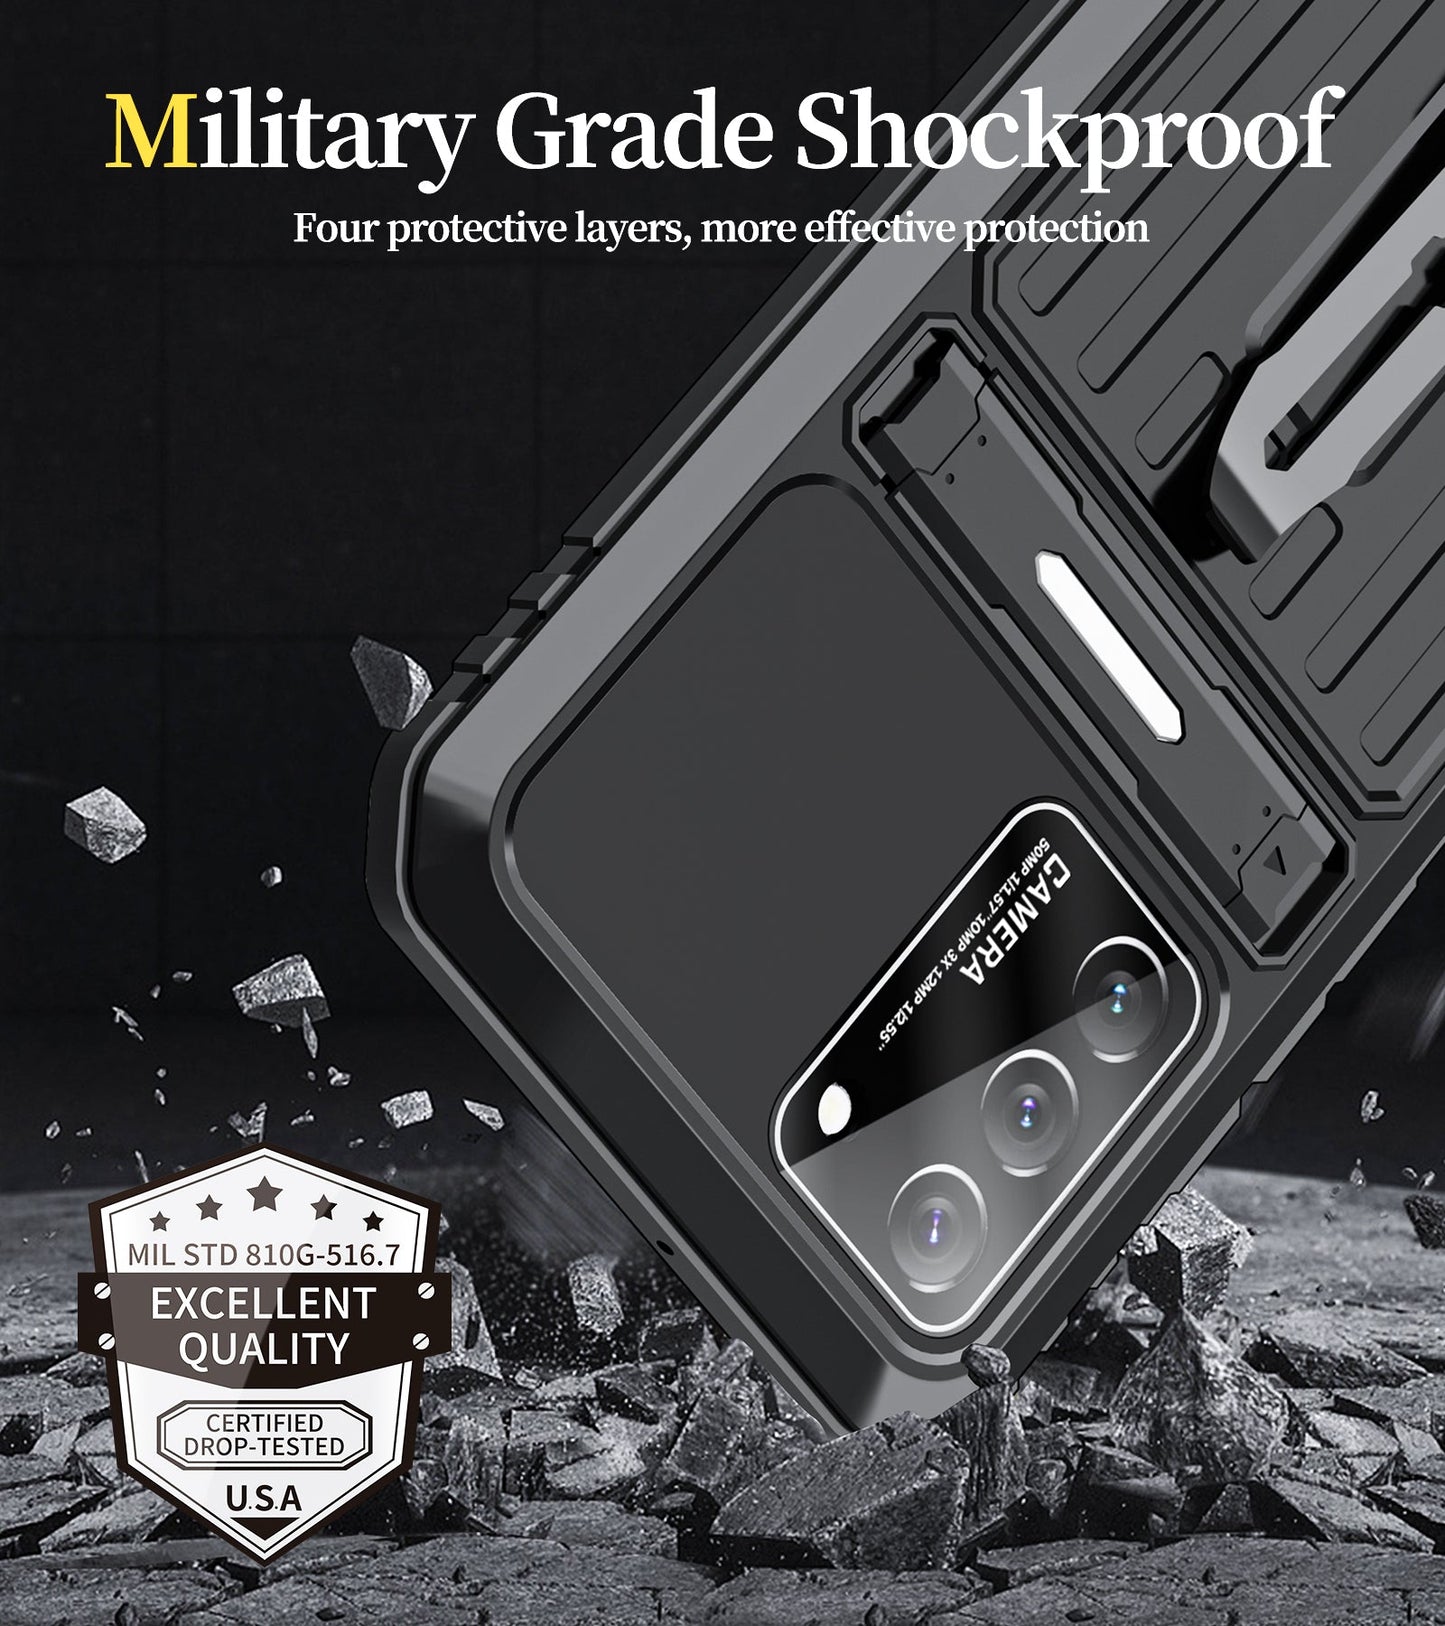 Luxury Military Samsung Galaxy S23 Ultra Metal Armor Case Shockproof Cover Plus Back Clip Invisible Bracket